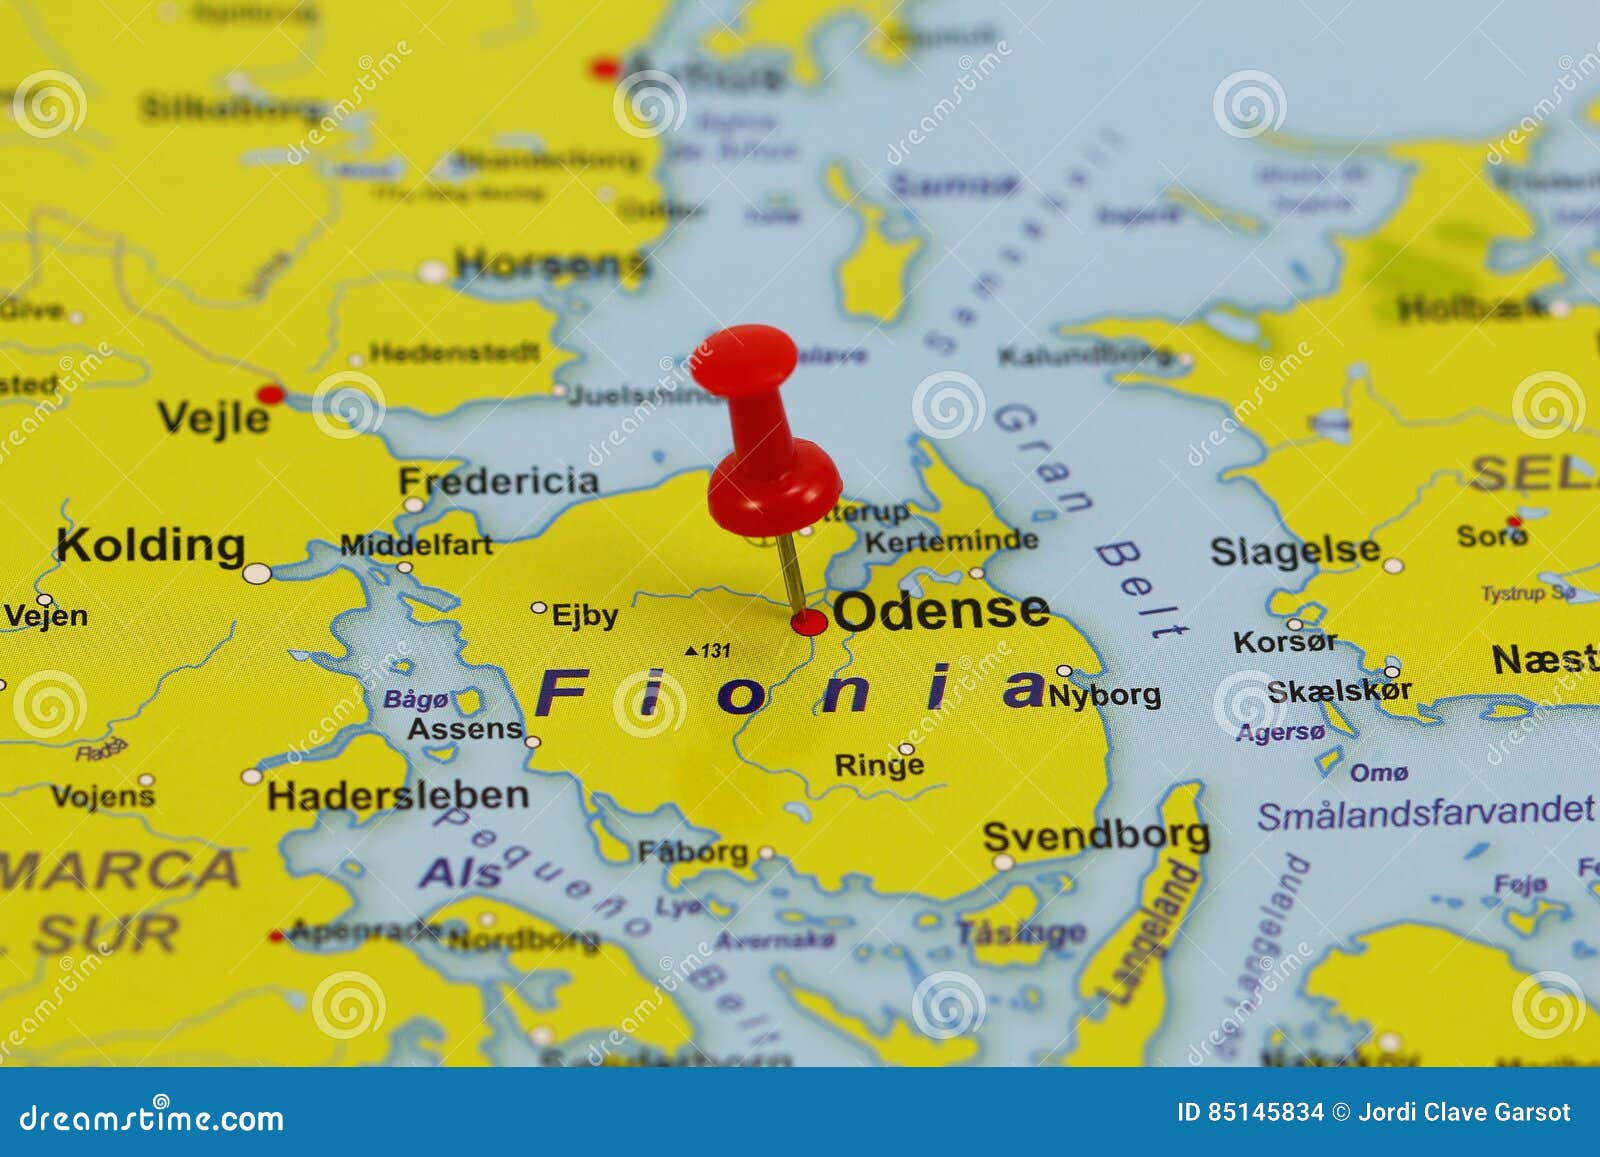 Odense Pin In A Map Stock Photo Image Of Route Capital